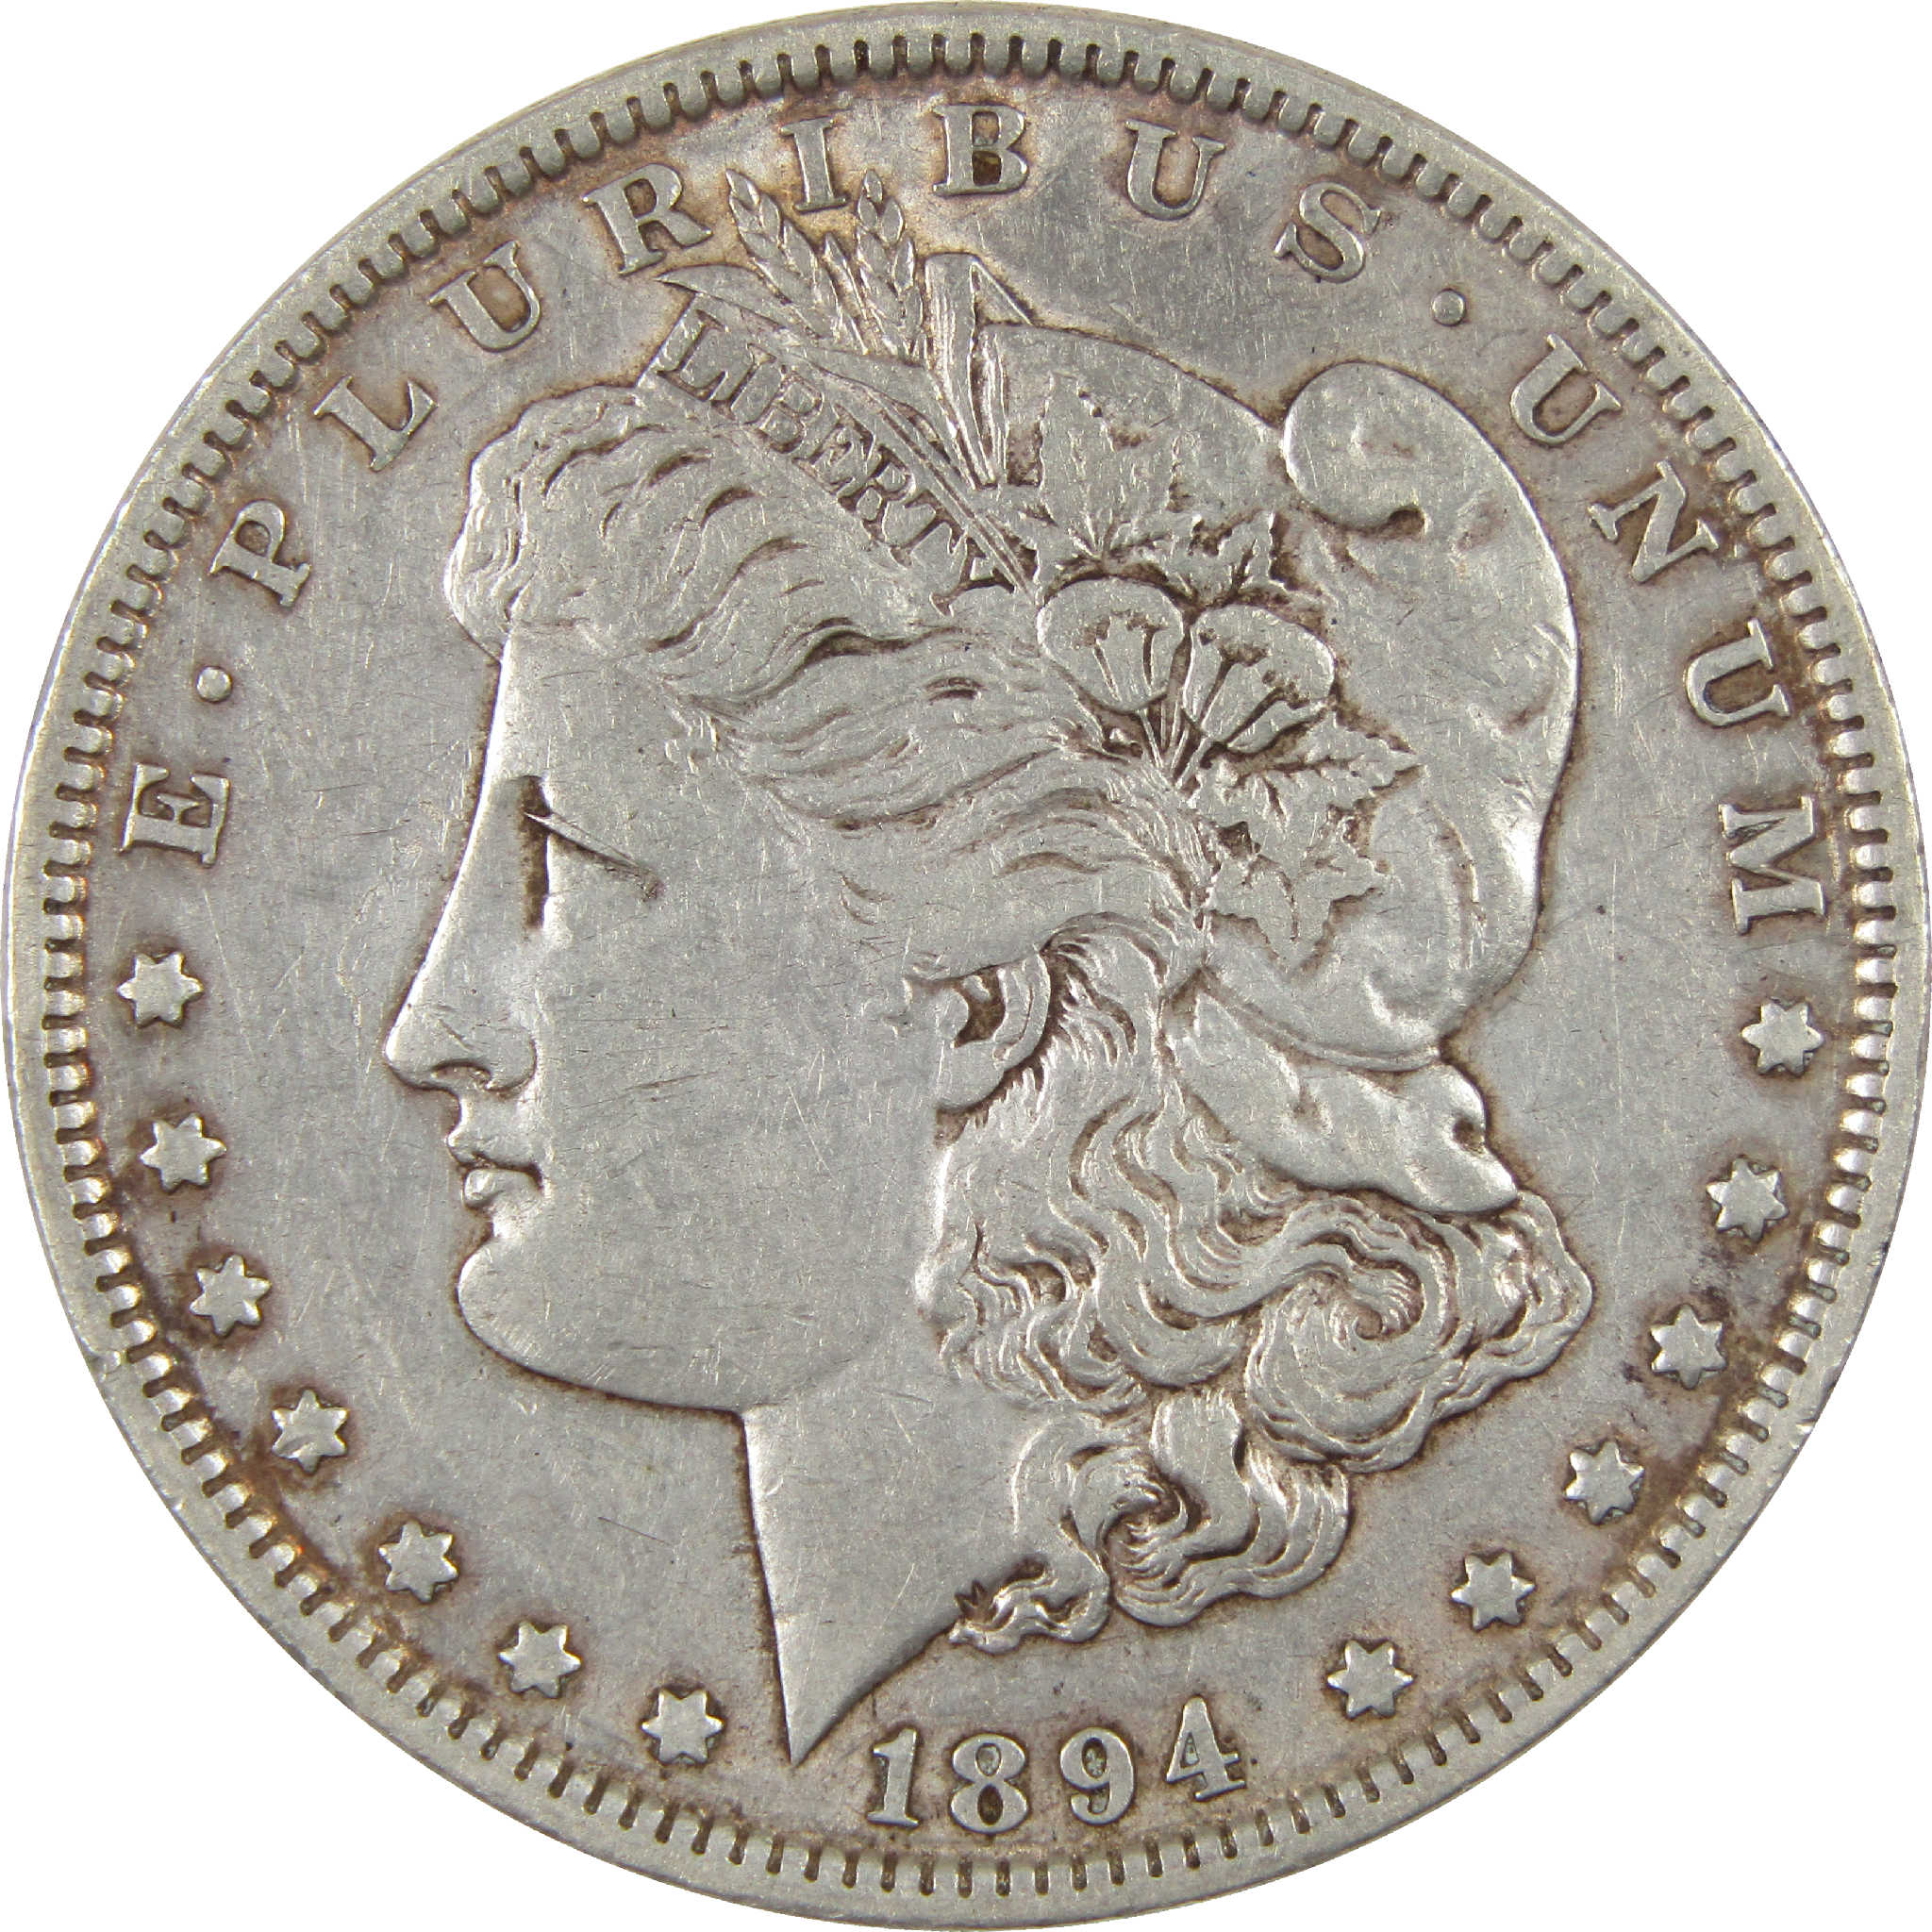 1894 Morgan Dollar XF EF Extremely Fine Details Silver $1 SKU:I11344 - Morgan coin - Morgan silver dollar - Morgan silver dollar for sale - Profile Coins &amp; Collectibles